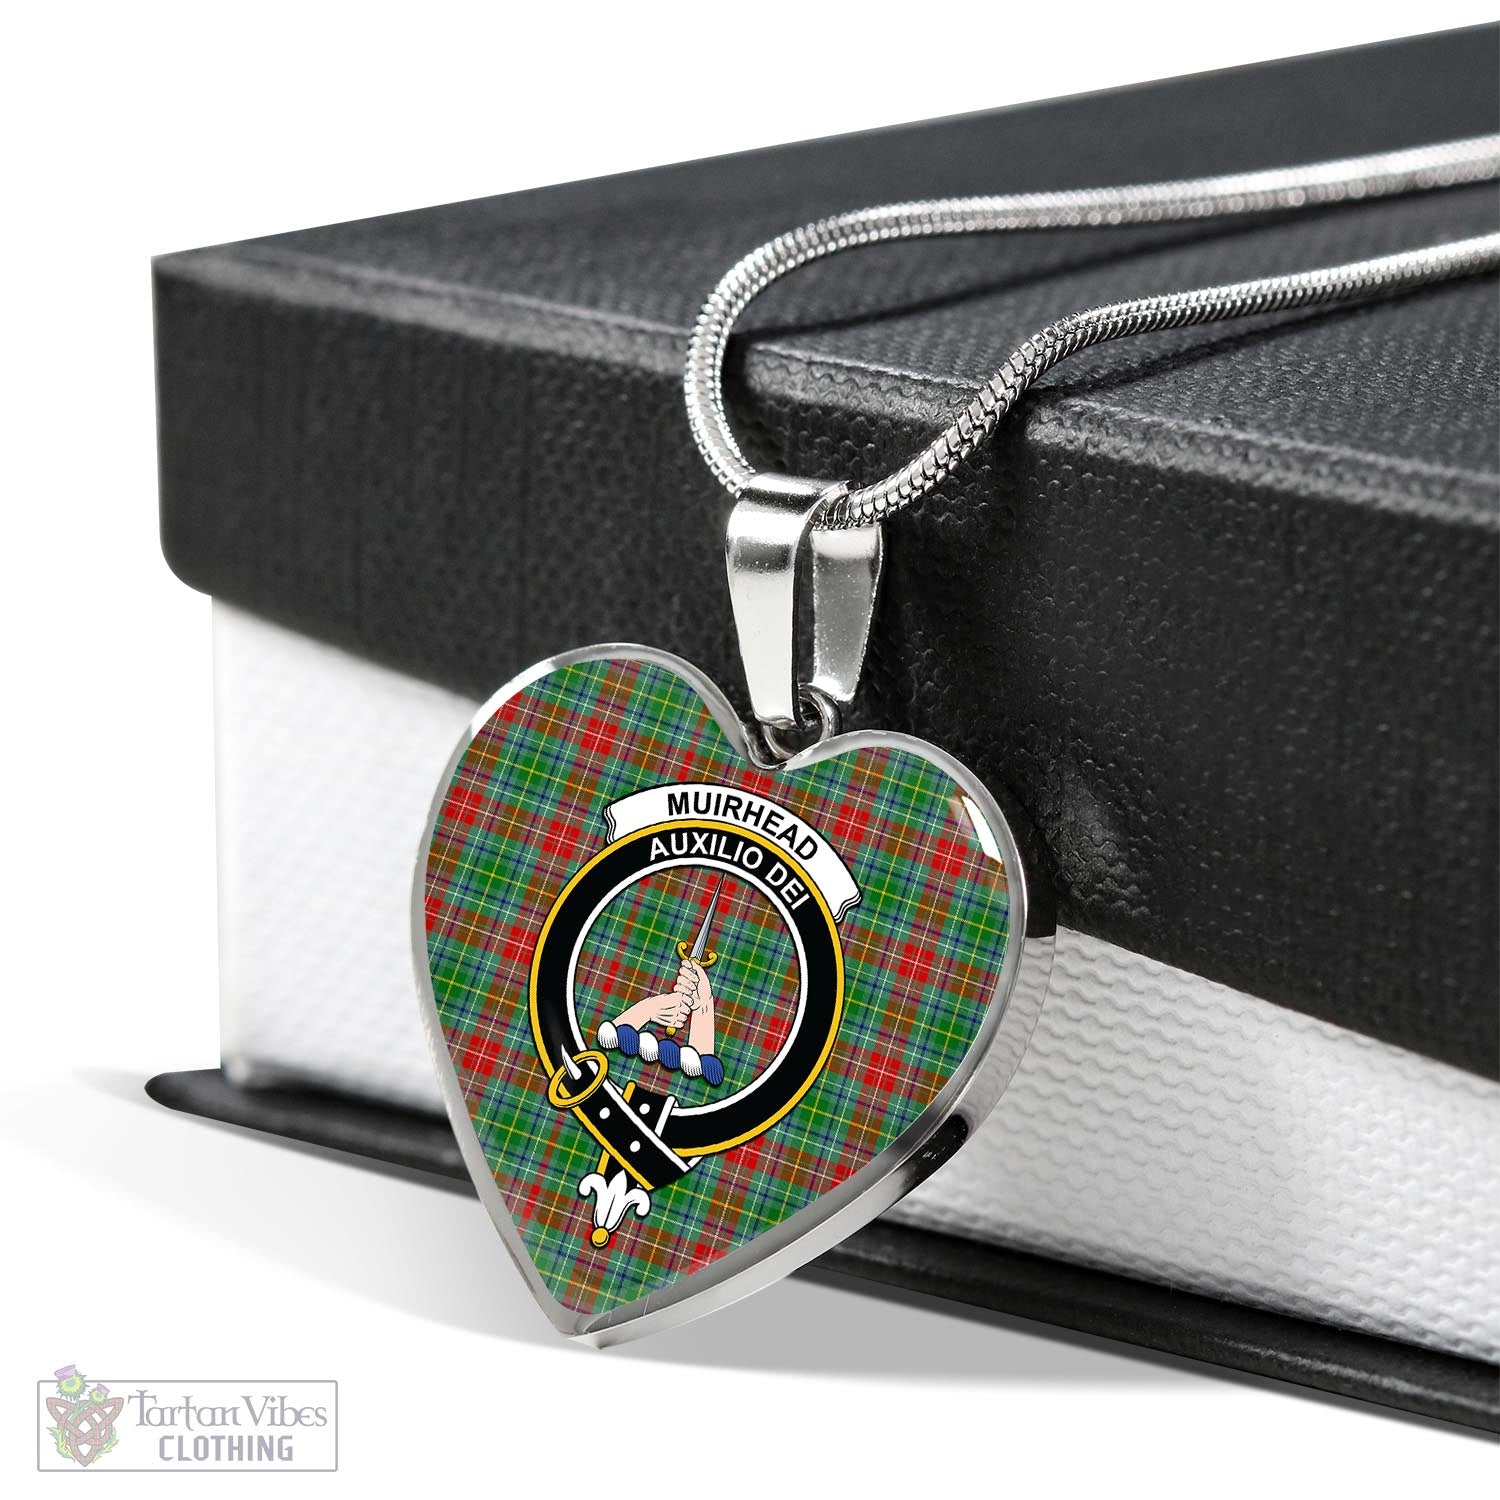 Tartan Vibes Clothing Muirhead Tartan Heart Necklace with Family Crest